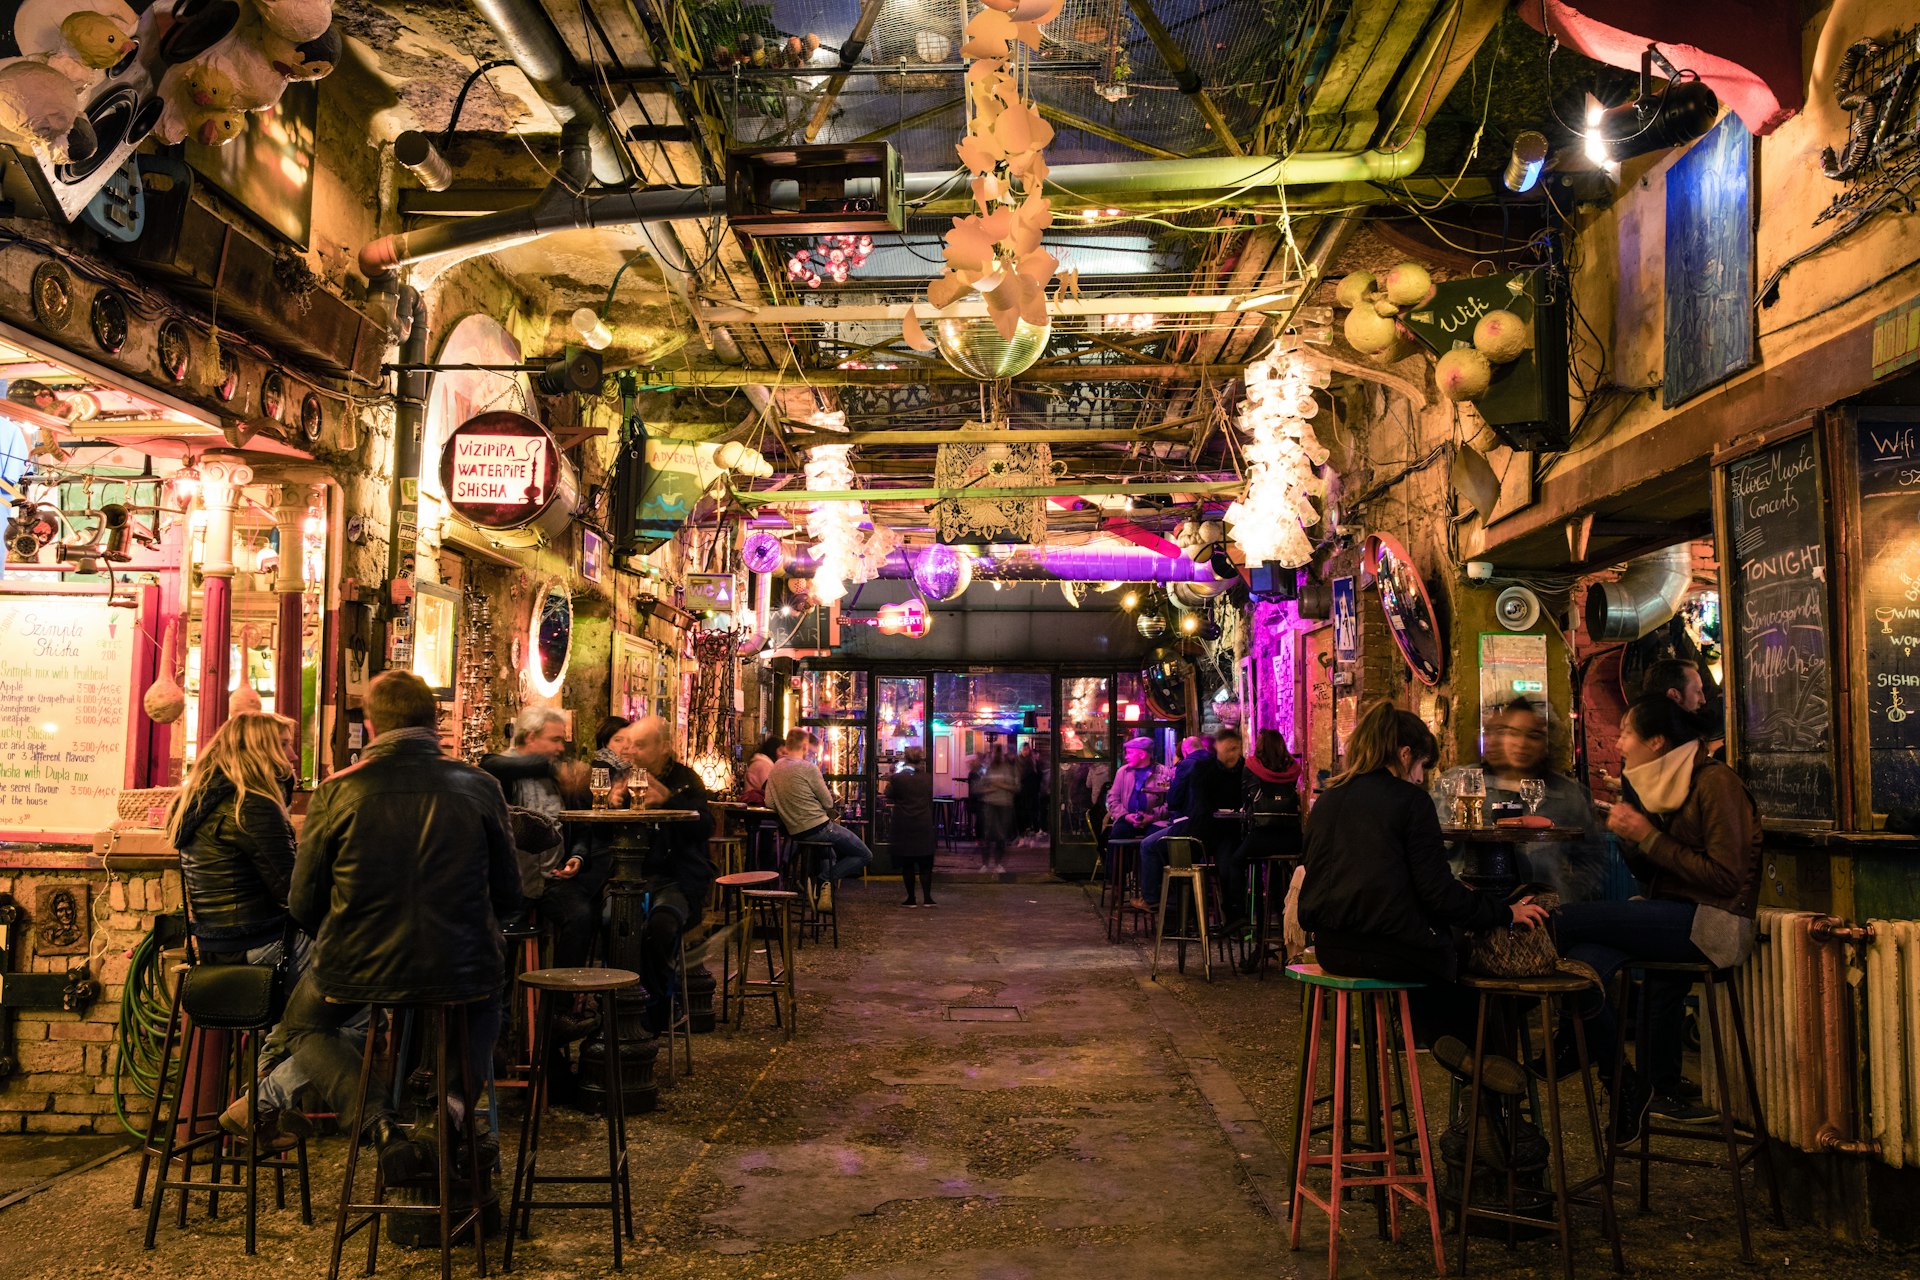 Many people sitting at tables in the ruin bar Szimpla Kert in Budapest, Hungary